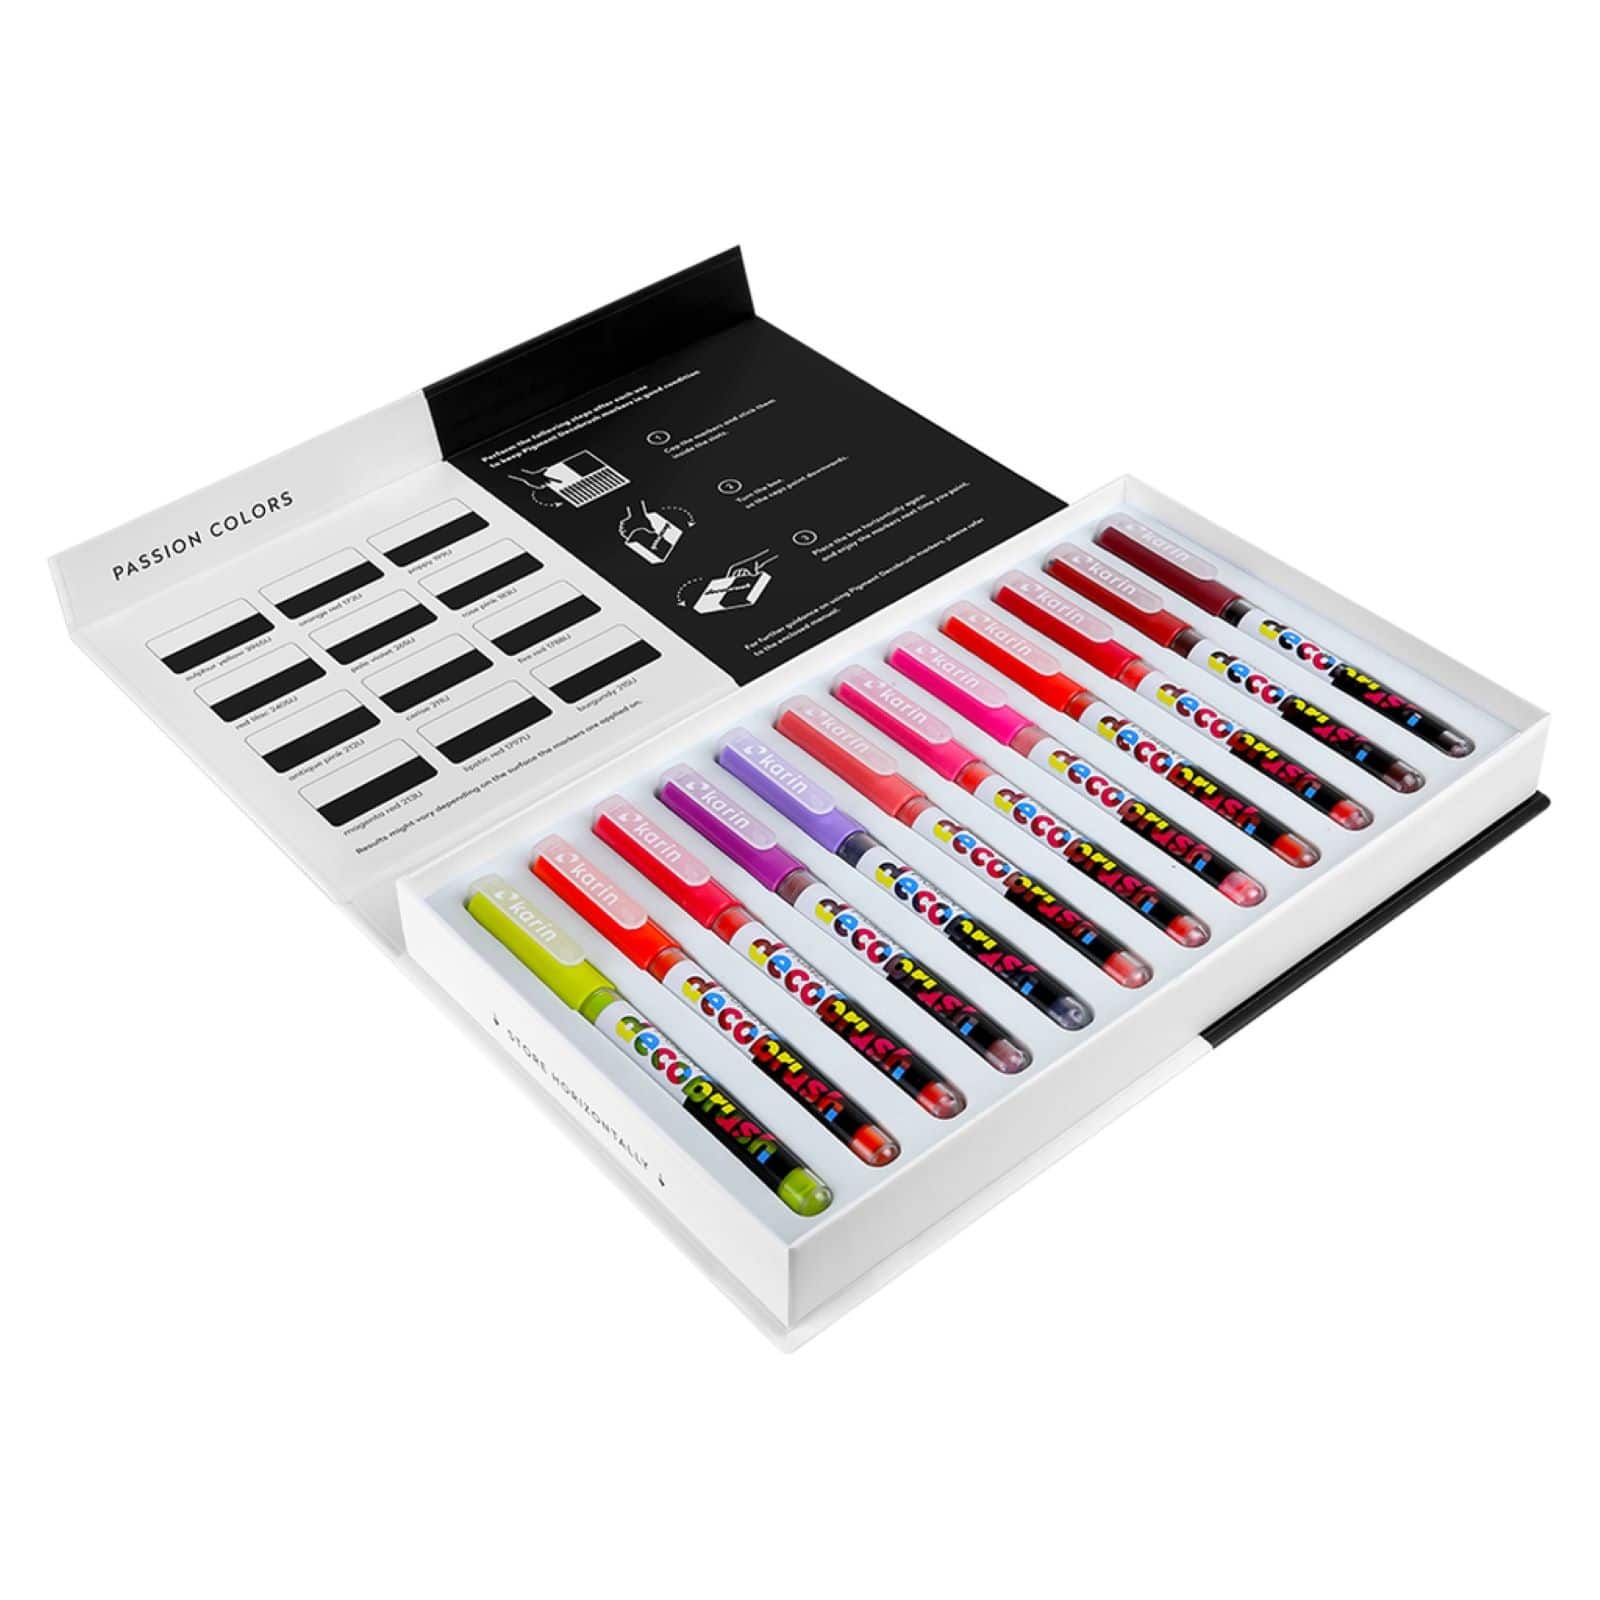 Karin Decobrush Passion Colors Pigment Markers, 12ct.